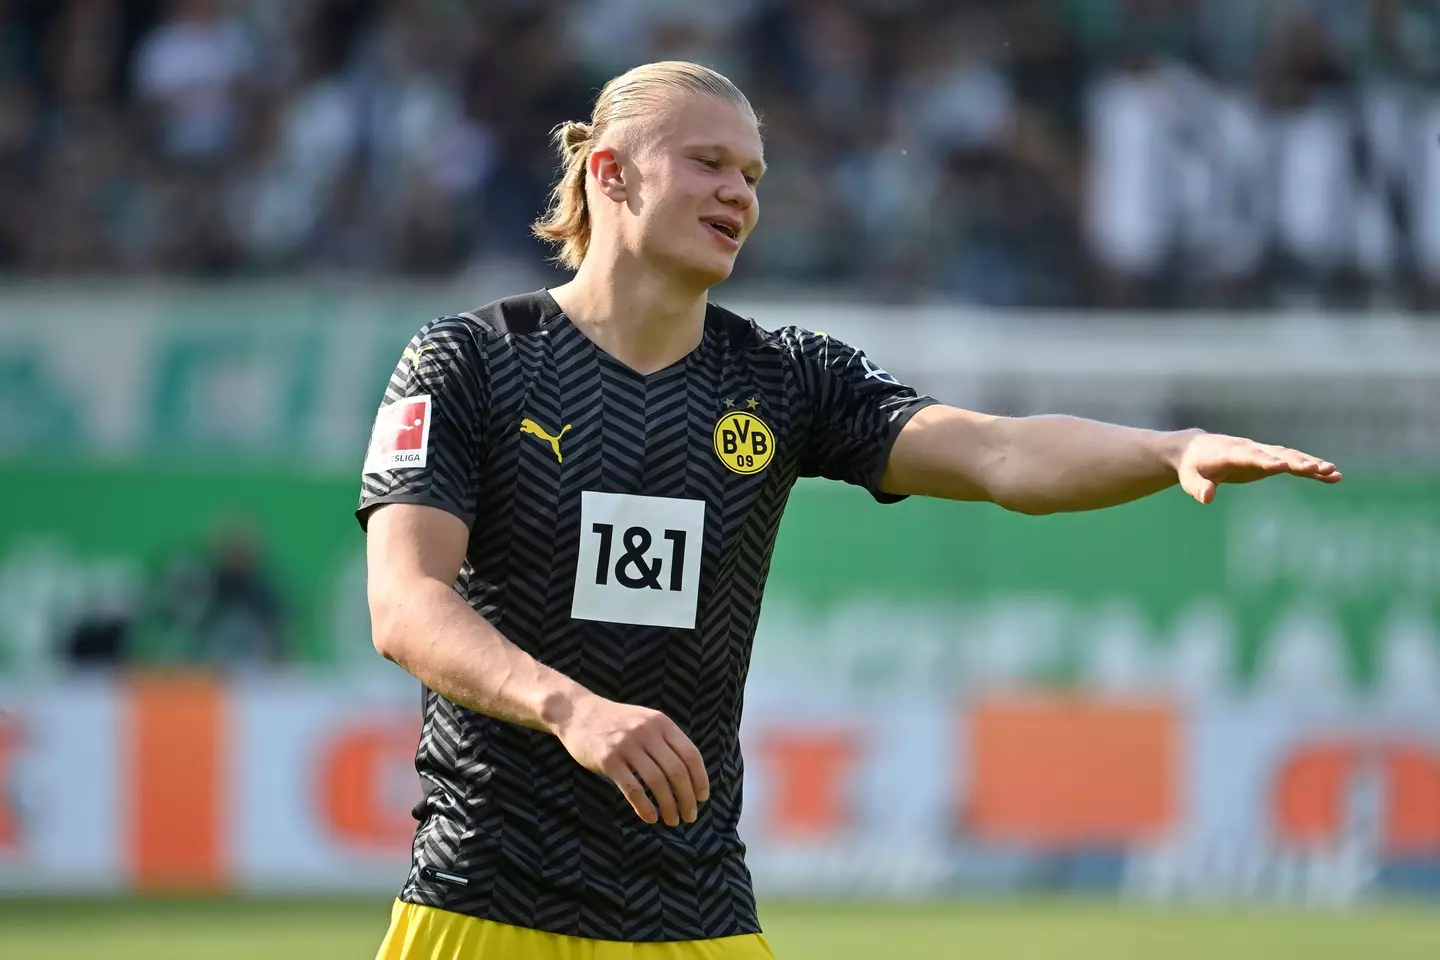 Haaland is set to join City in July (Image: PA)